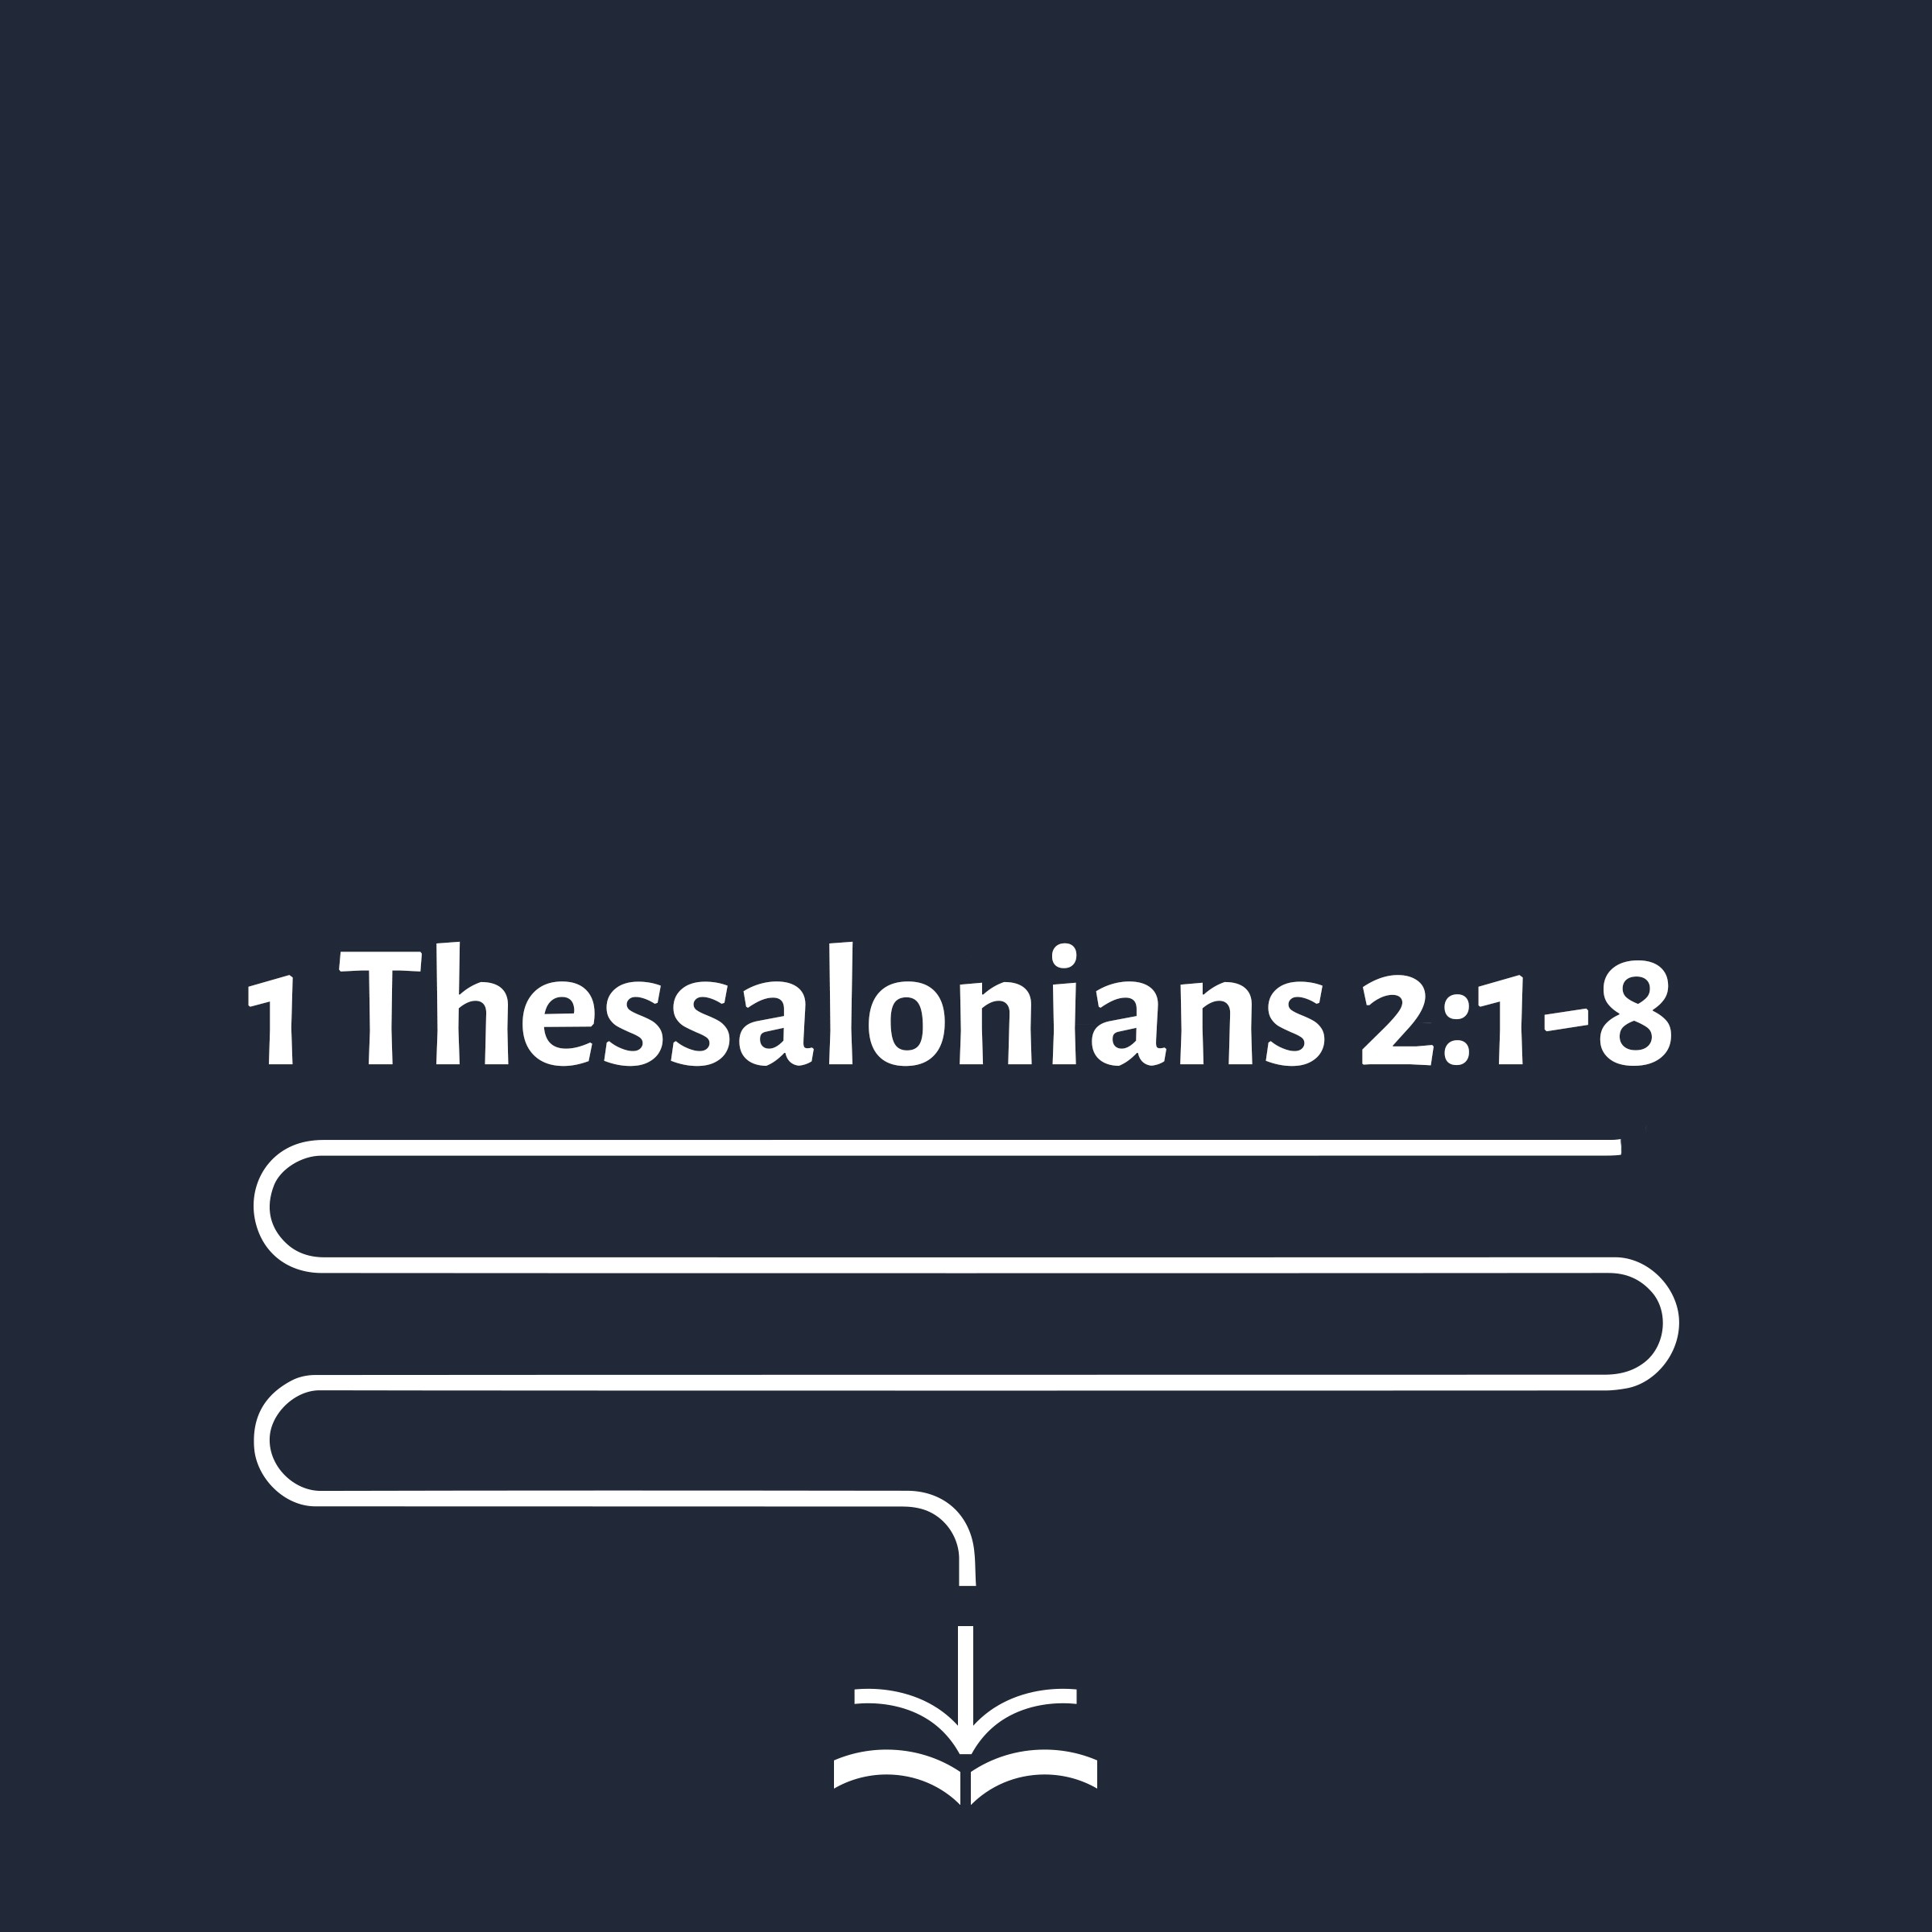 1 Thessalonians 2:1-8 - William Taylor